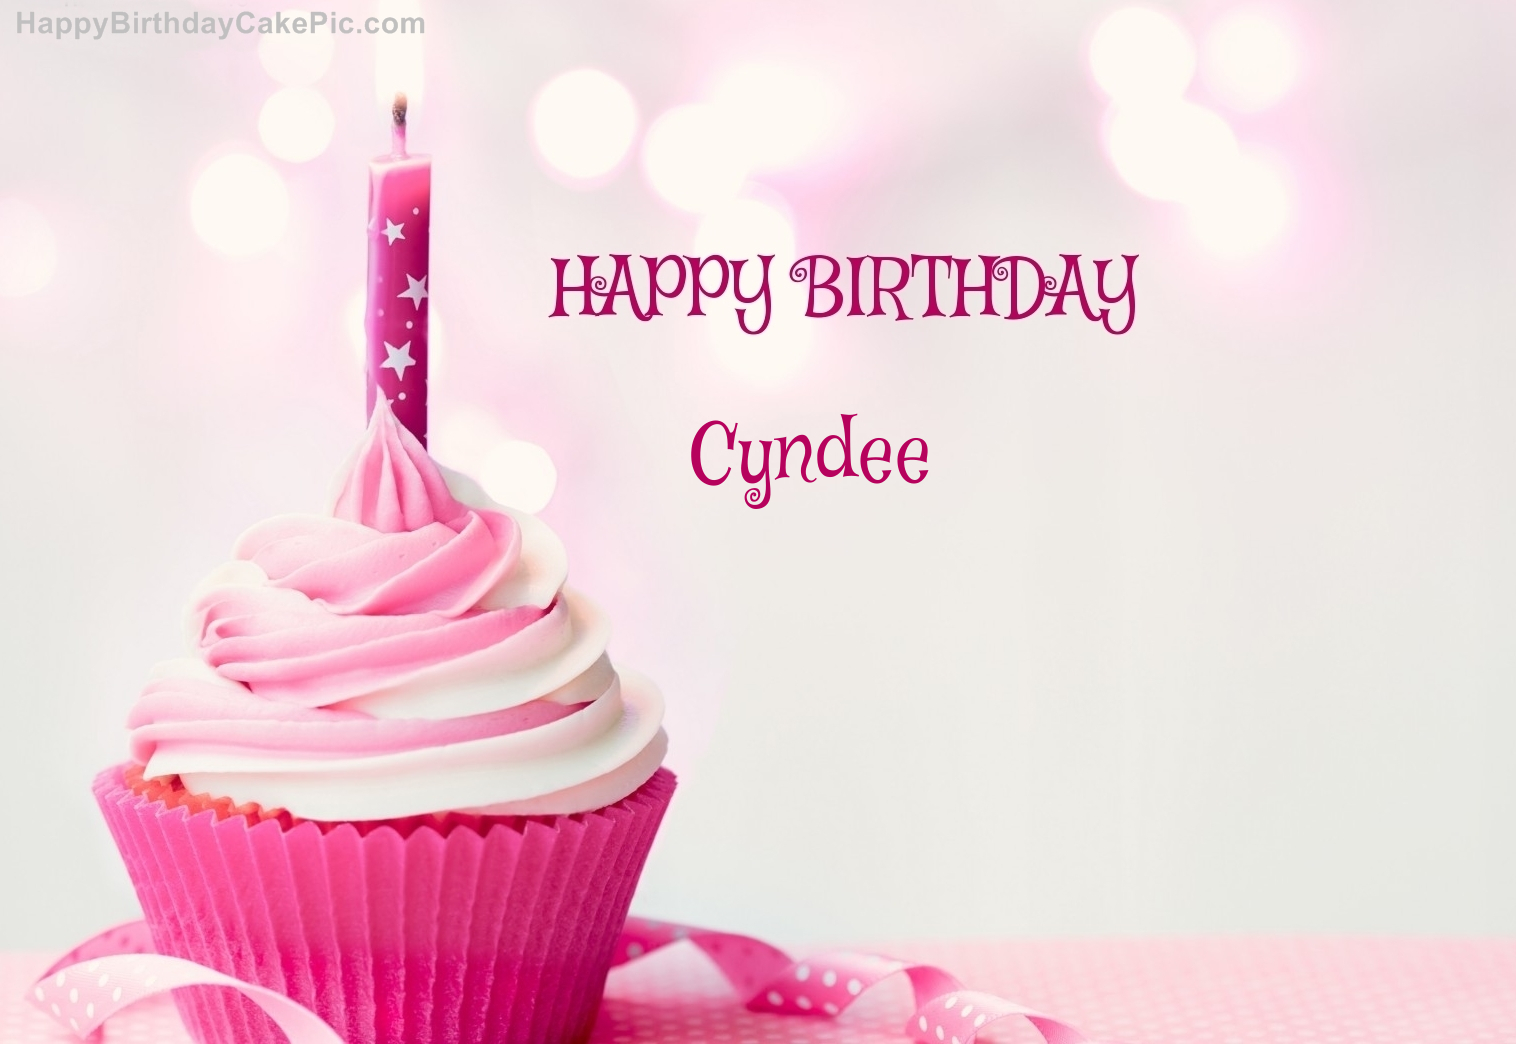 https://happybirthdaycakepic.com/pic-preview/Cyndee/7/happy-birthday-cupcake-candle-pink-picture-for-Cyndee.jpg